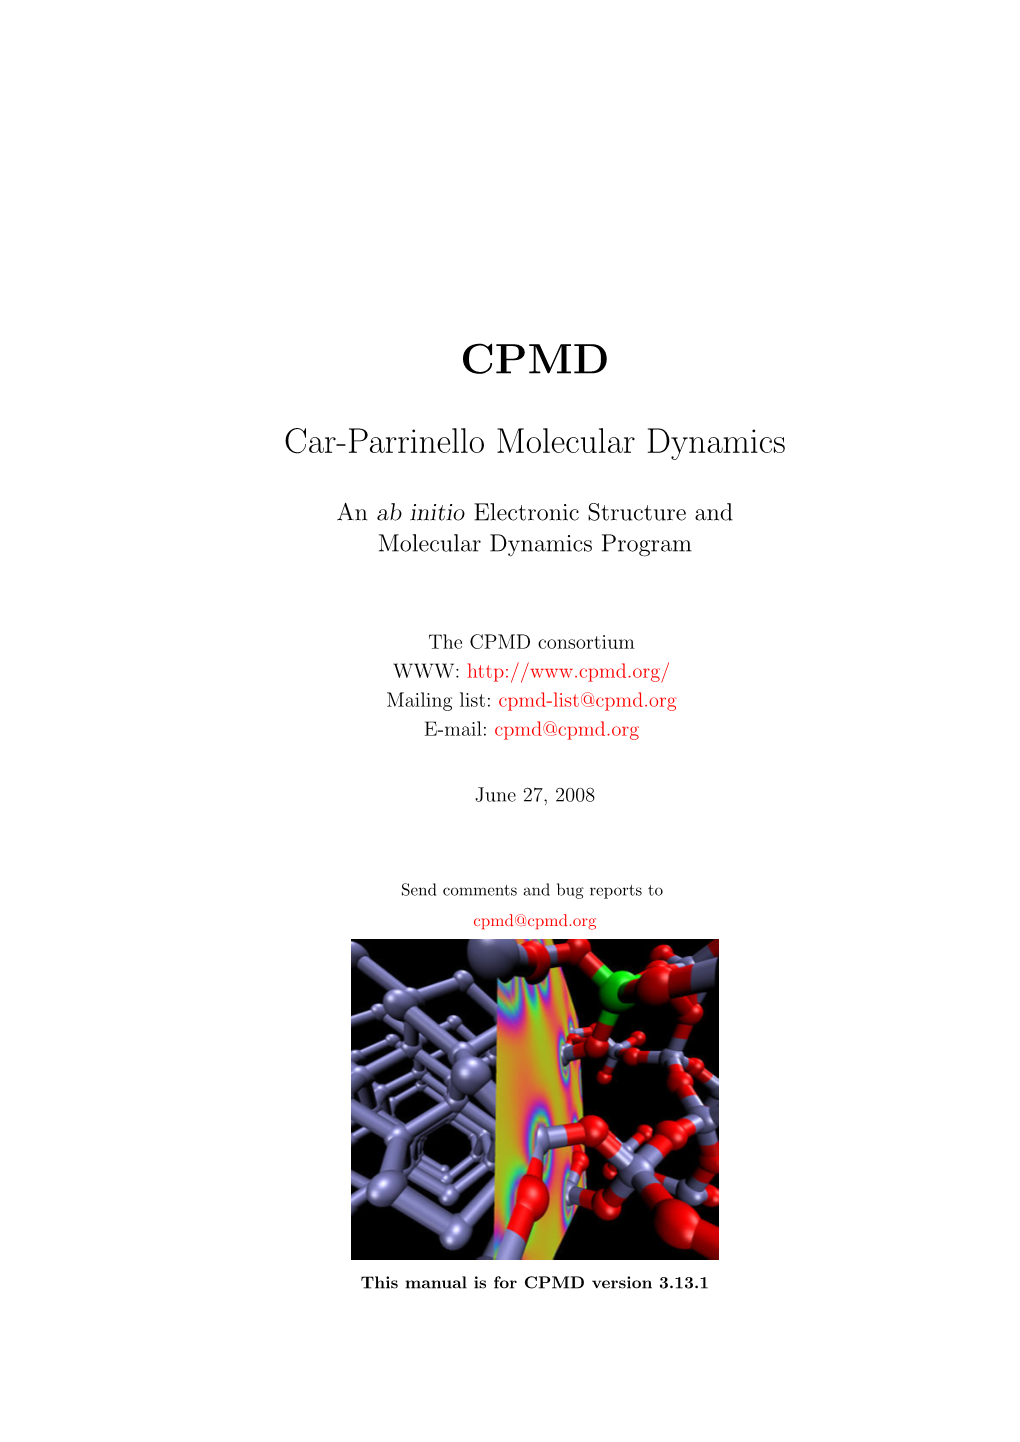 Manual of CPMD 3.13.1